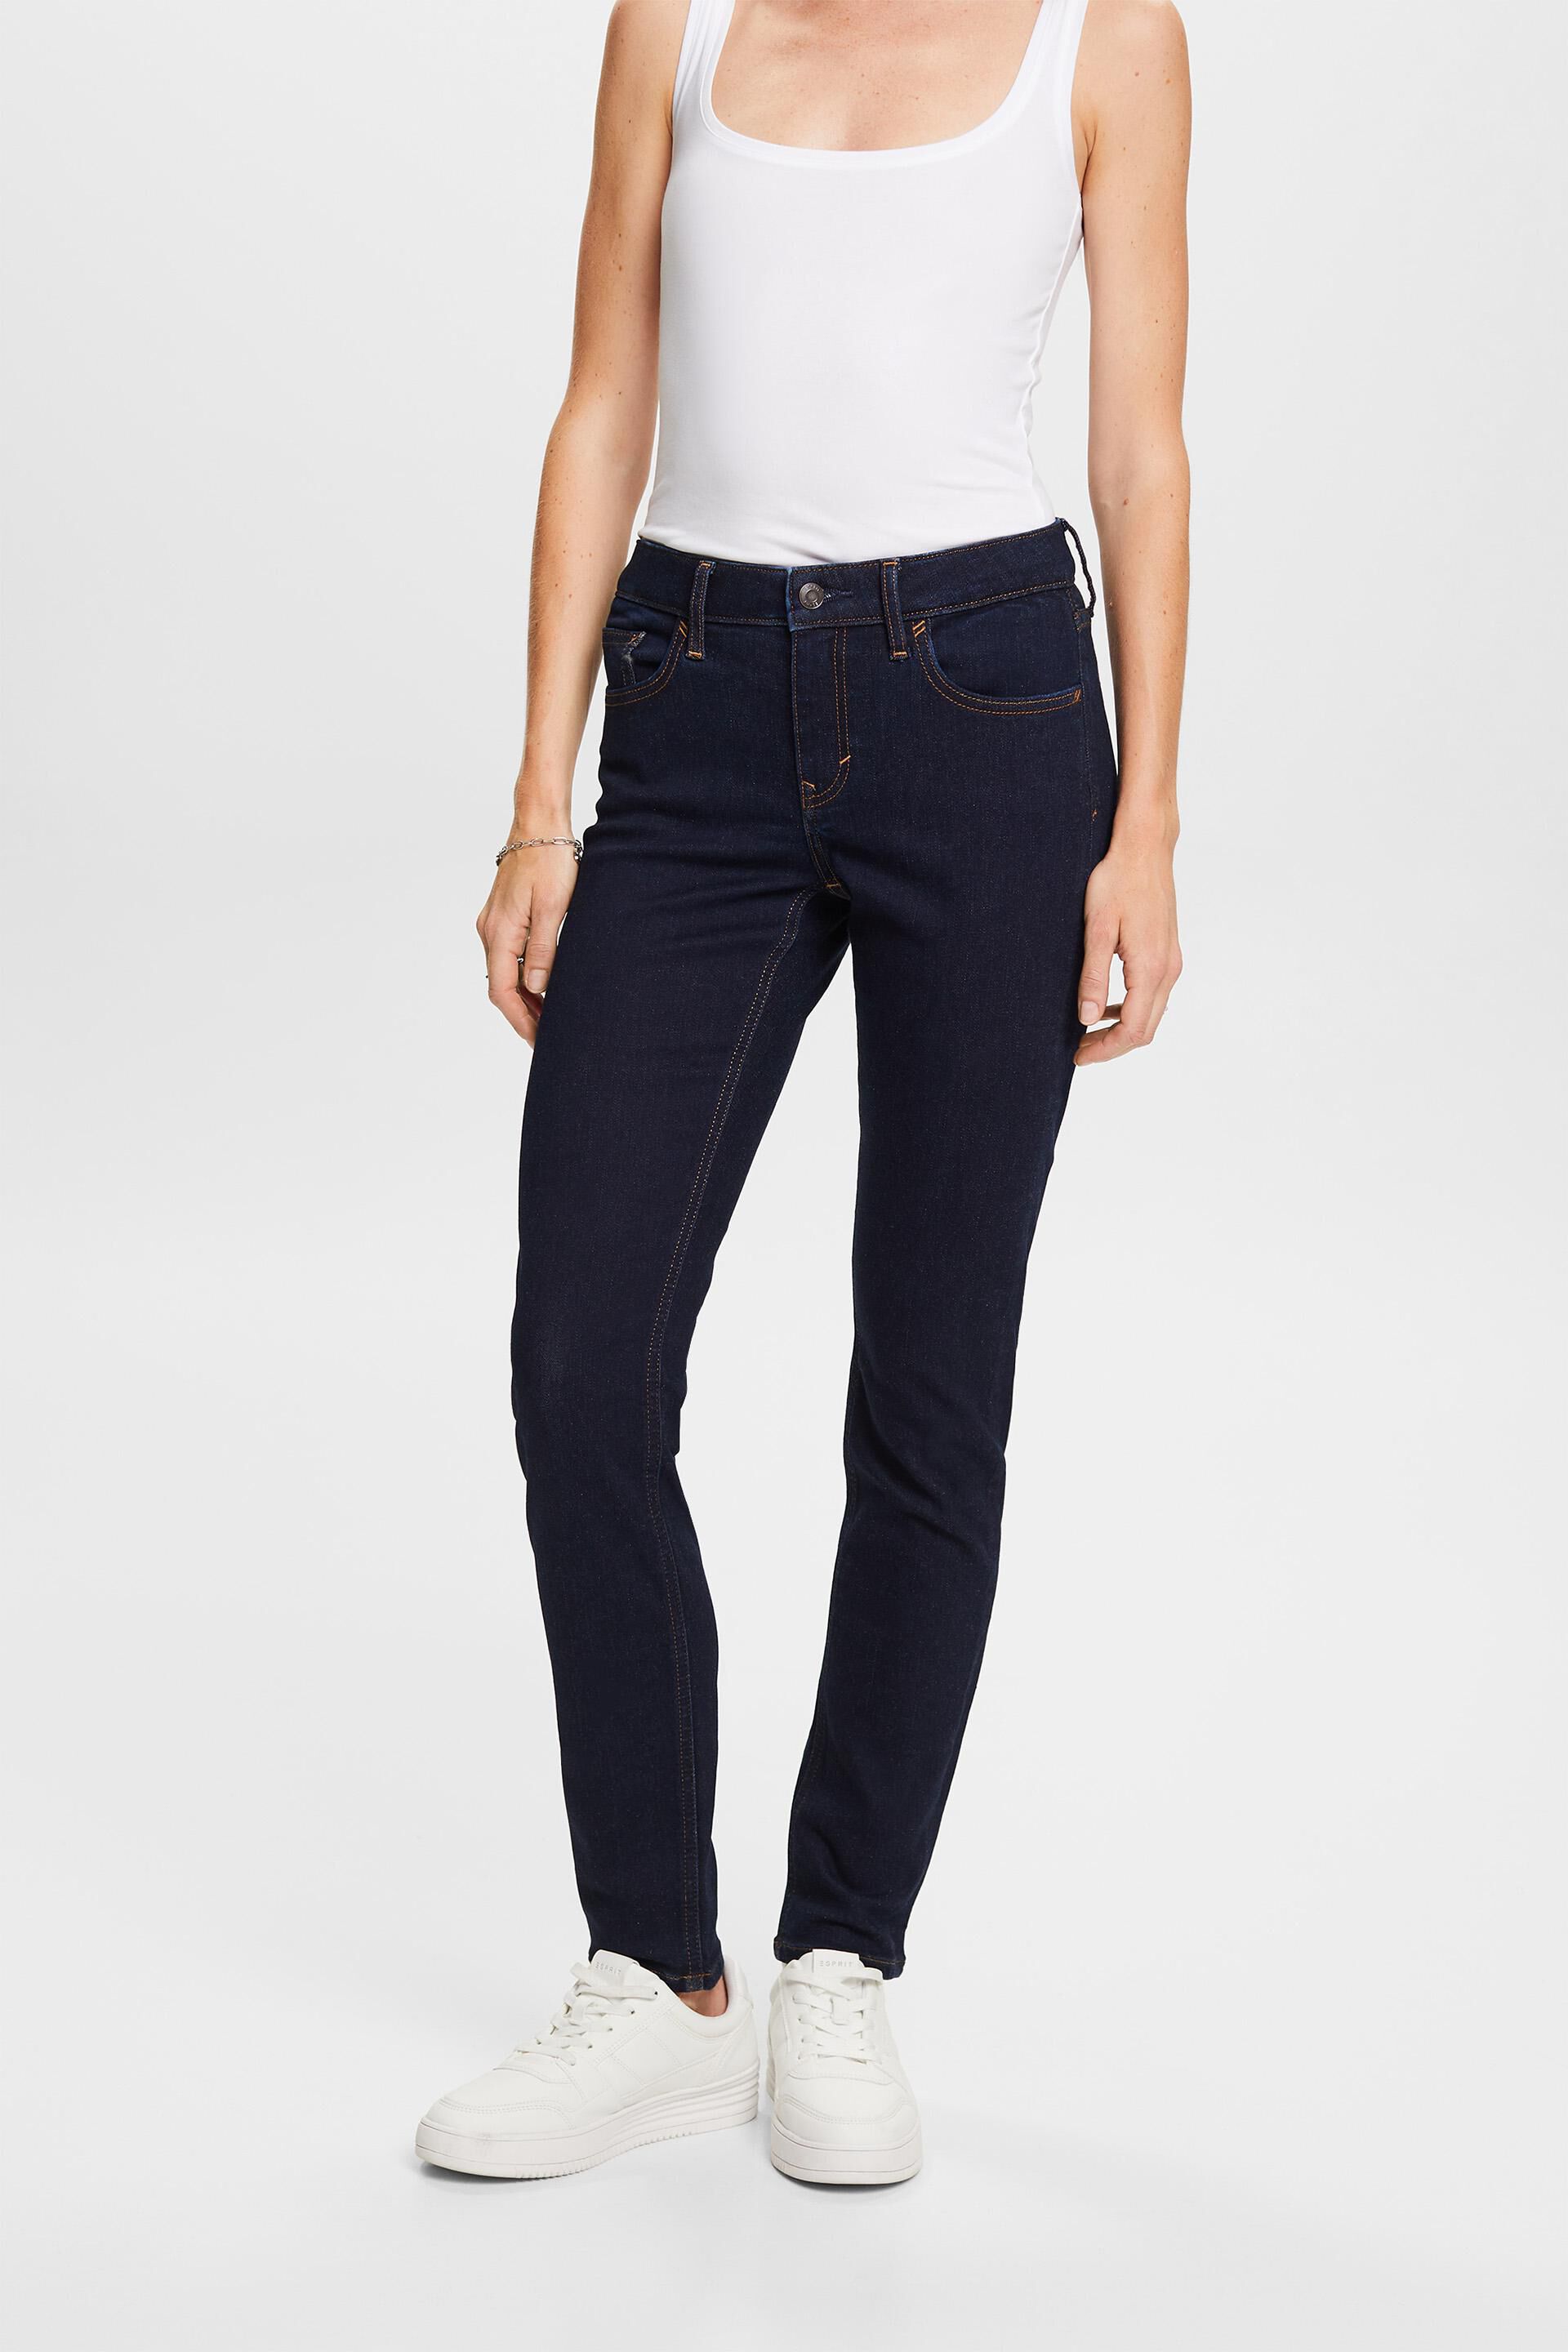 Esprit jeans stretch fit slim mid-rise Recycled: